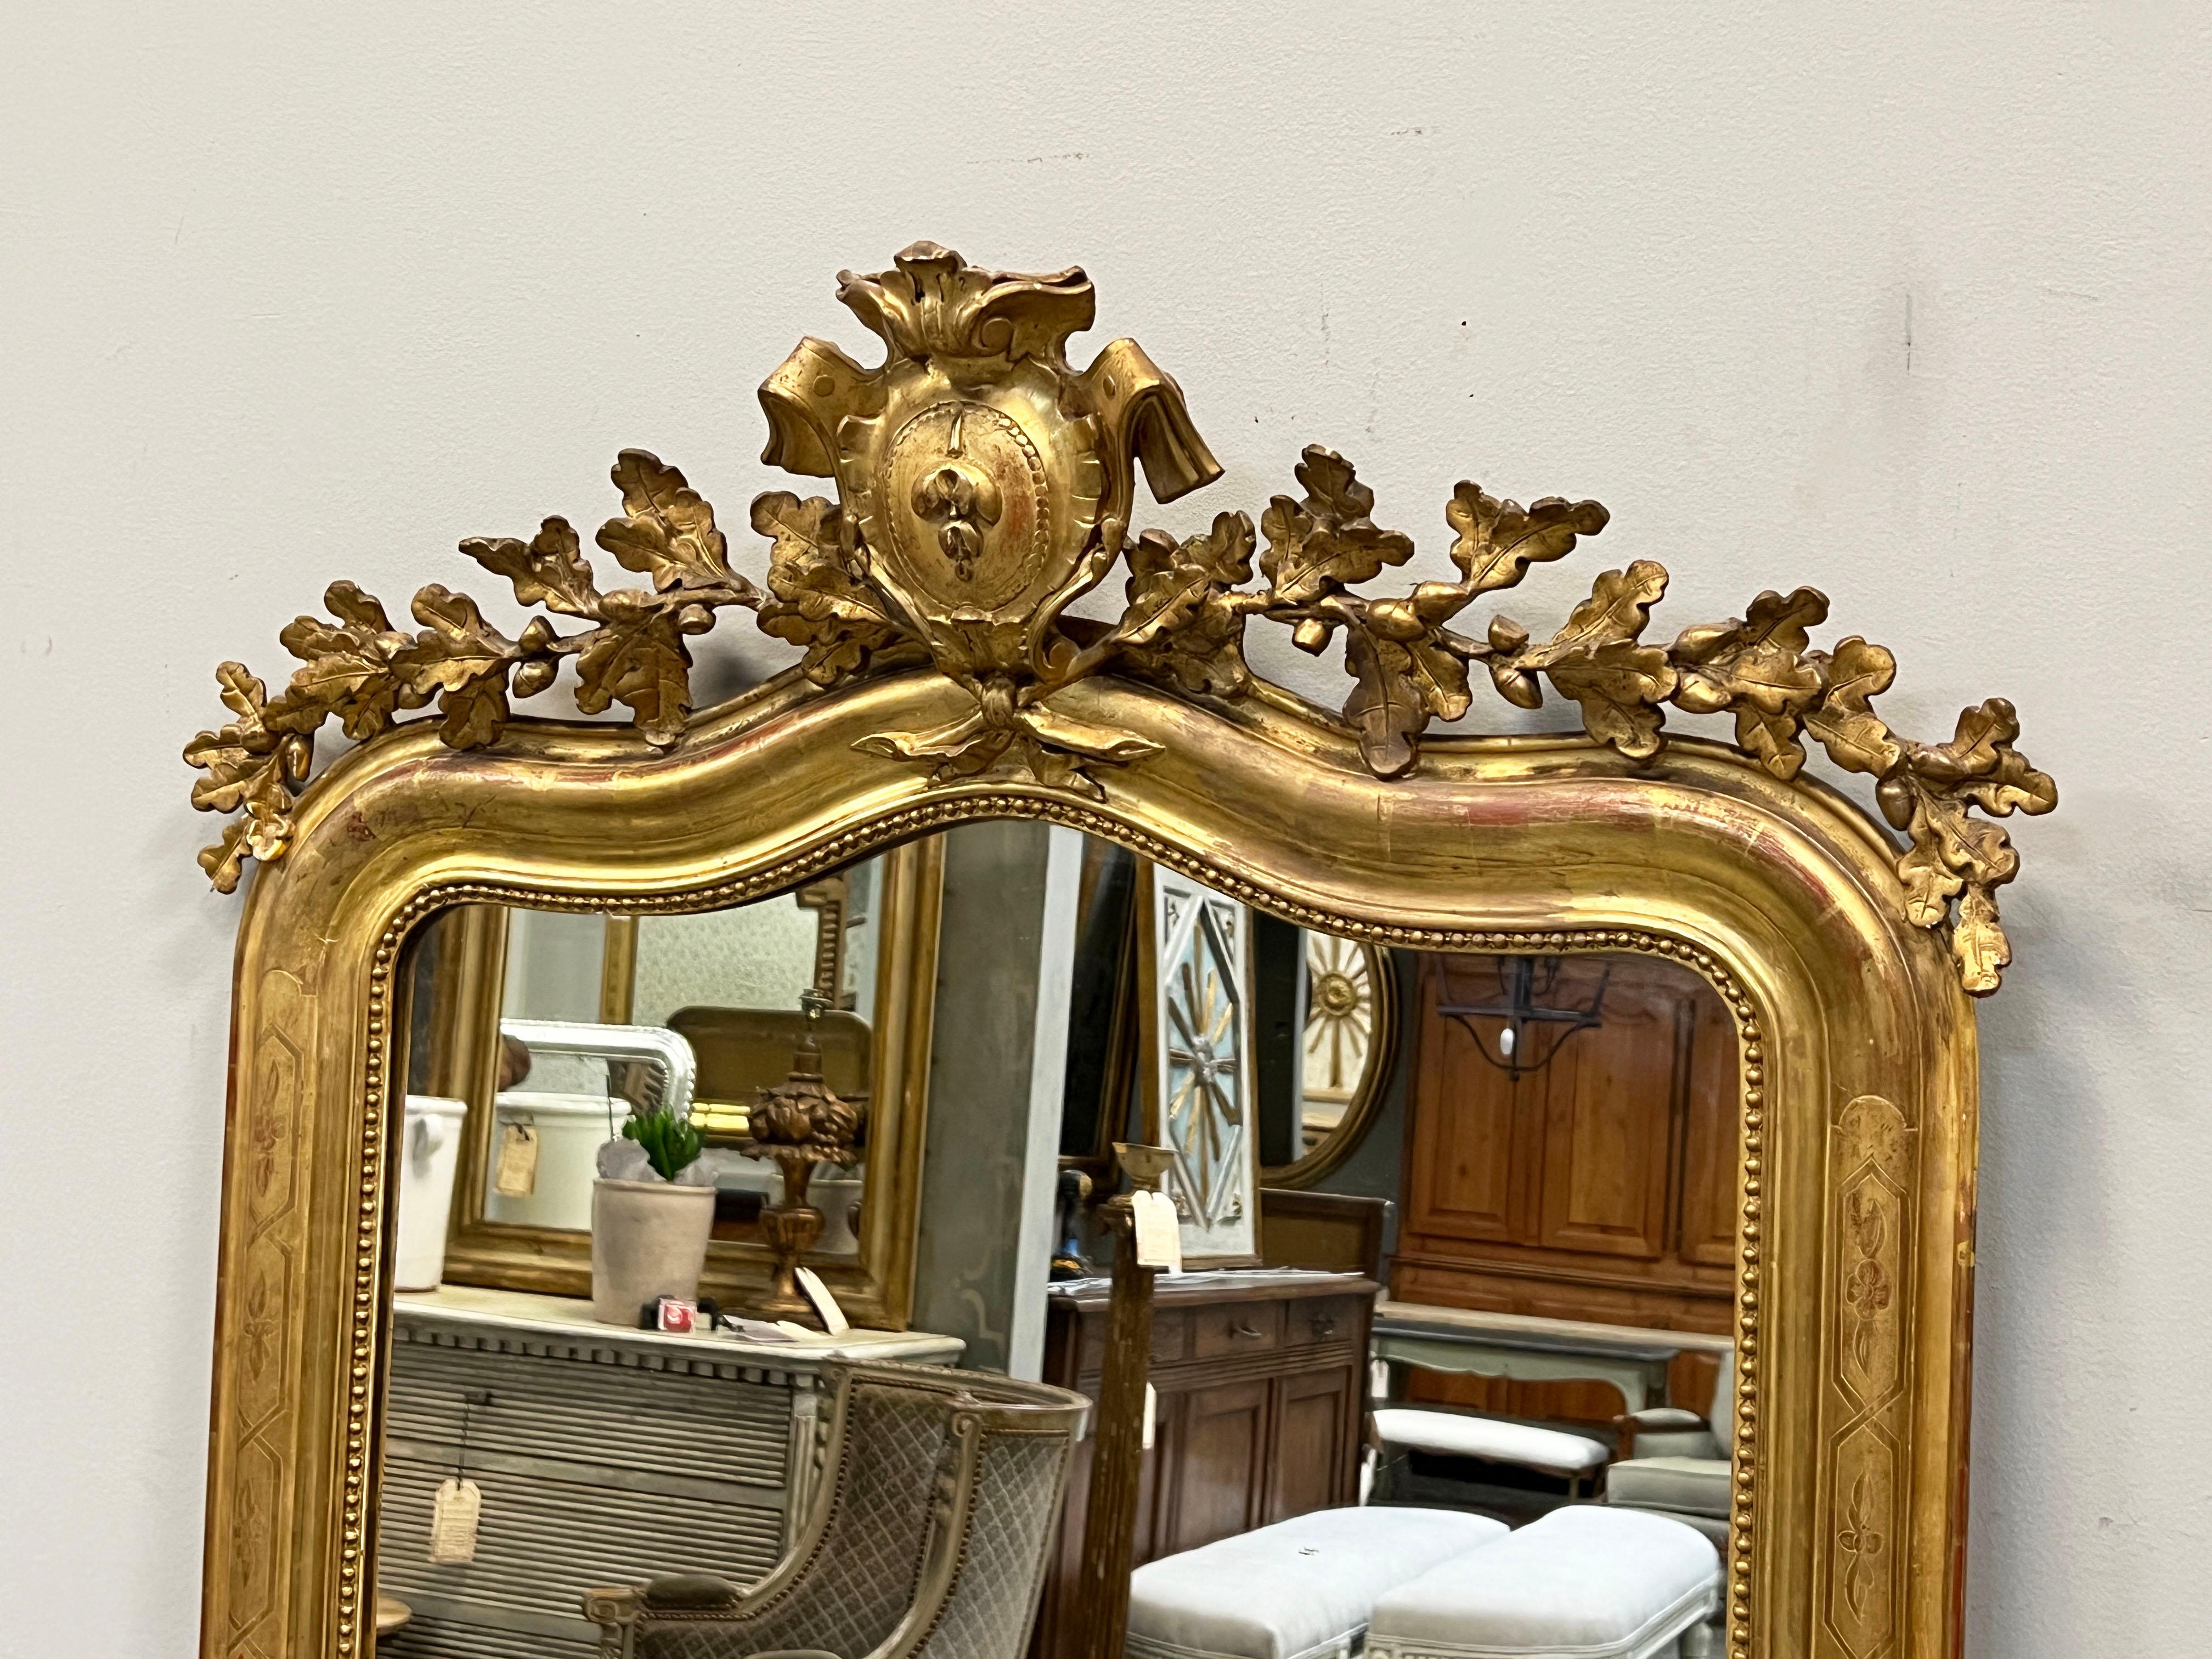 Mid 19th Century French Louis XVI Style Gold Gilt Mirror. Molded gold gilt frame with 